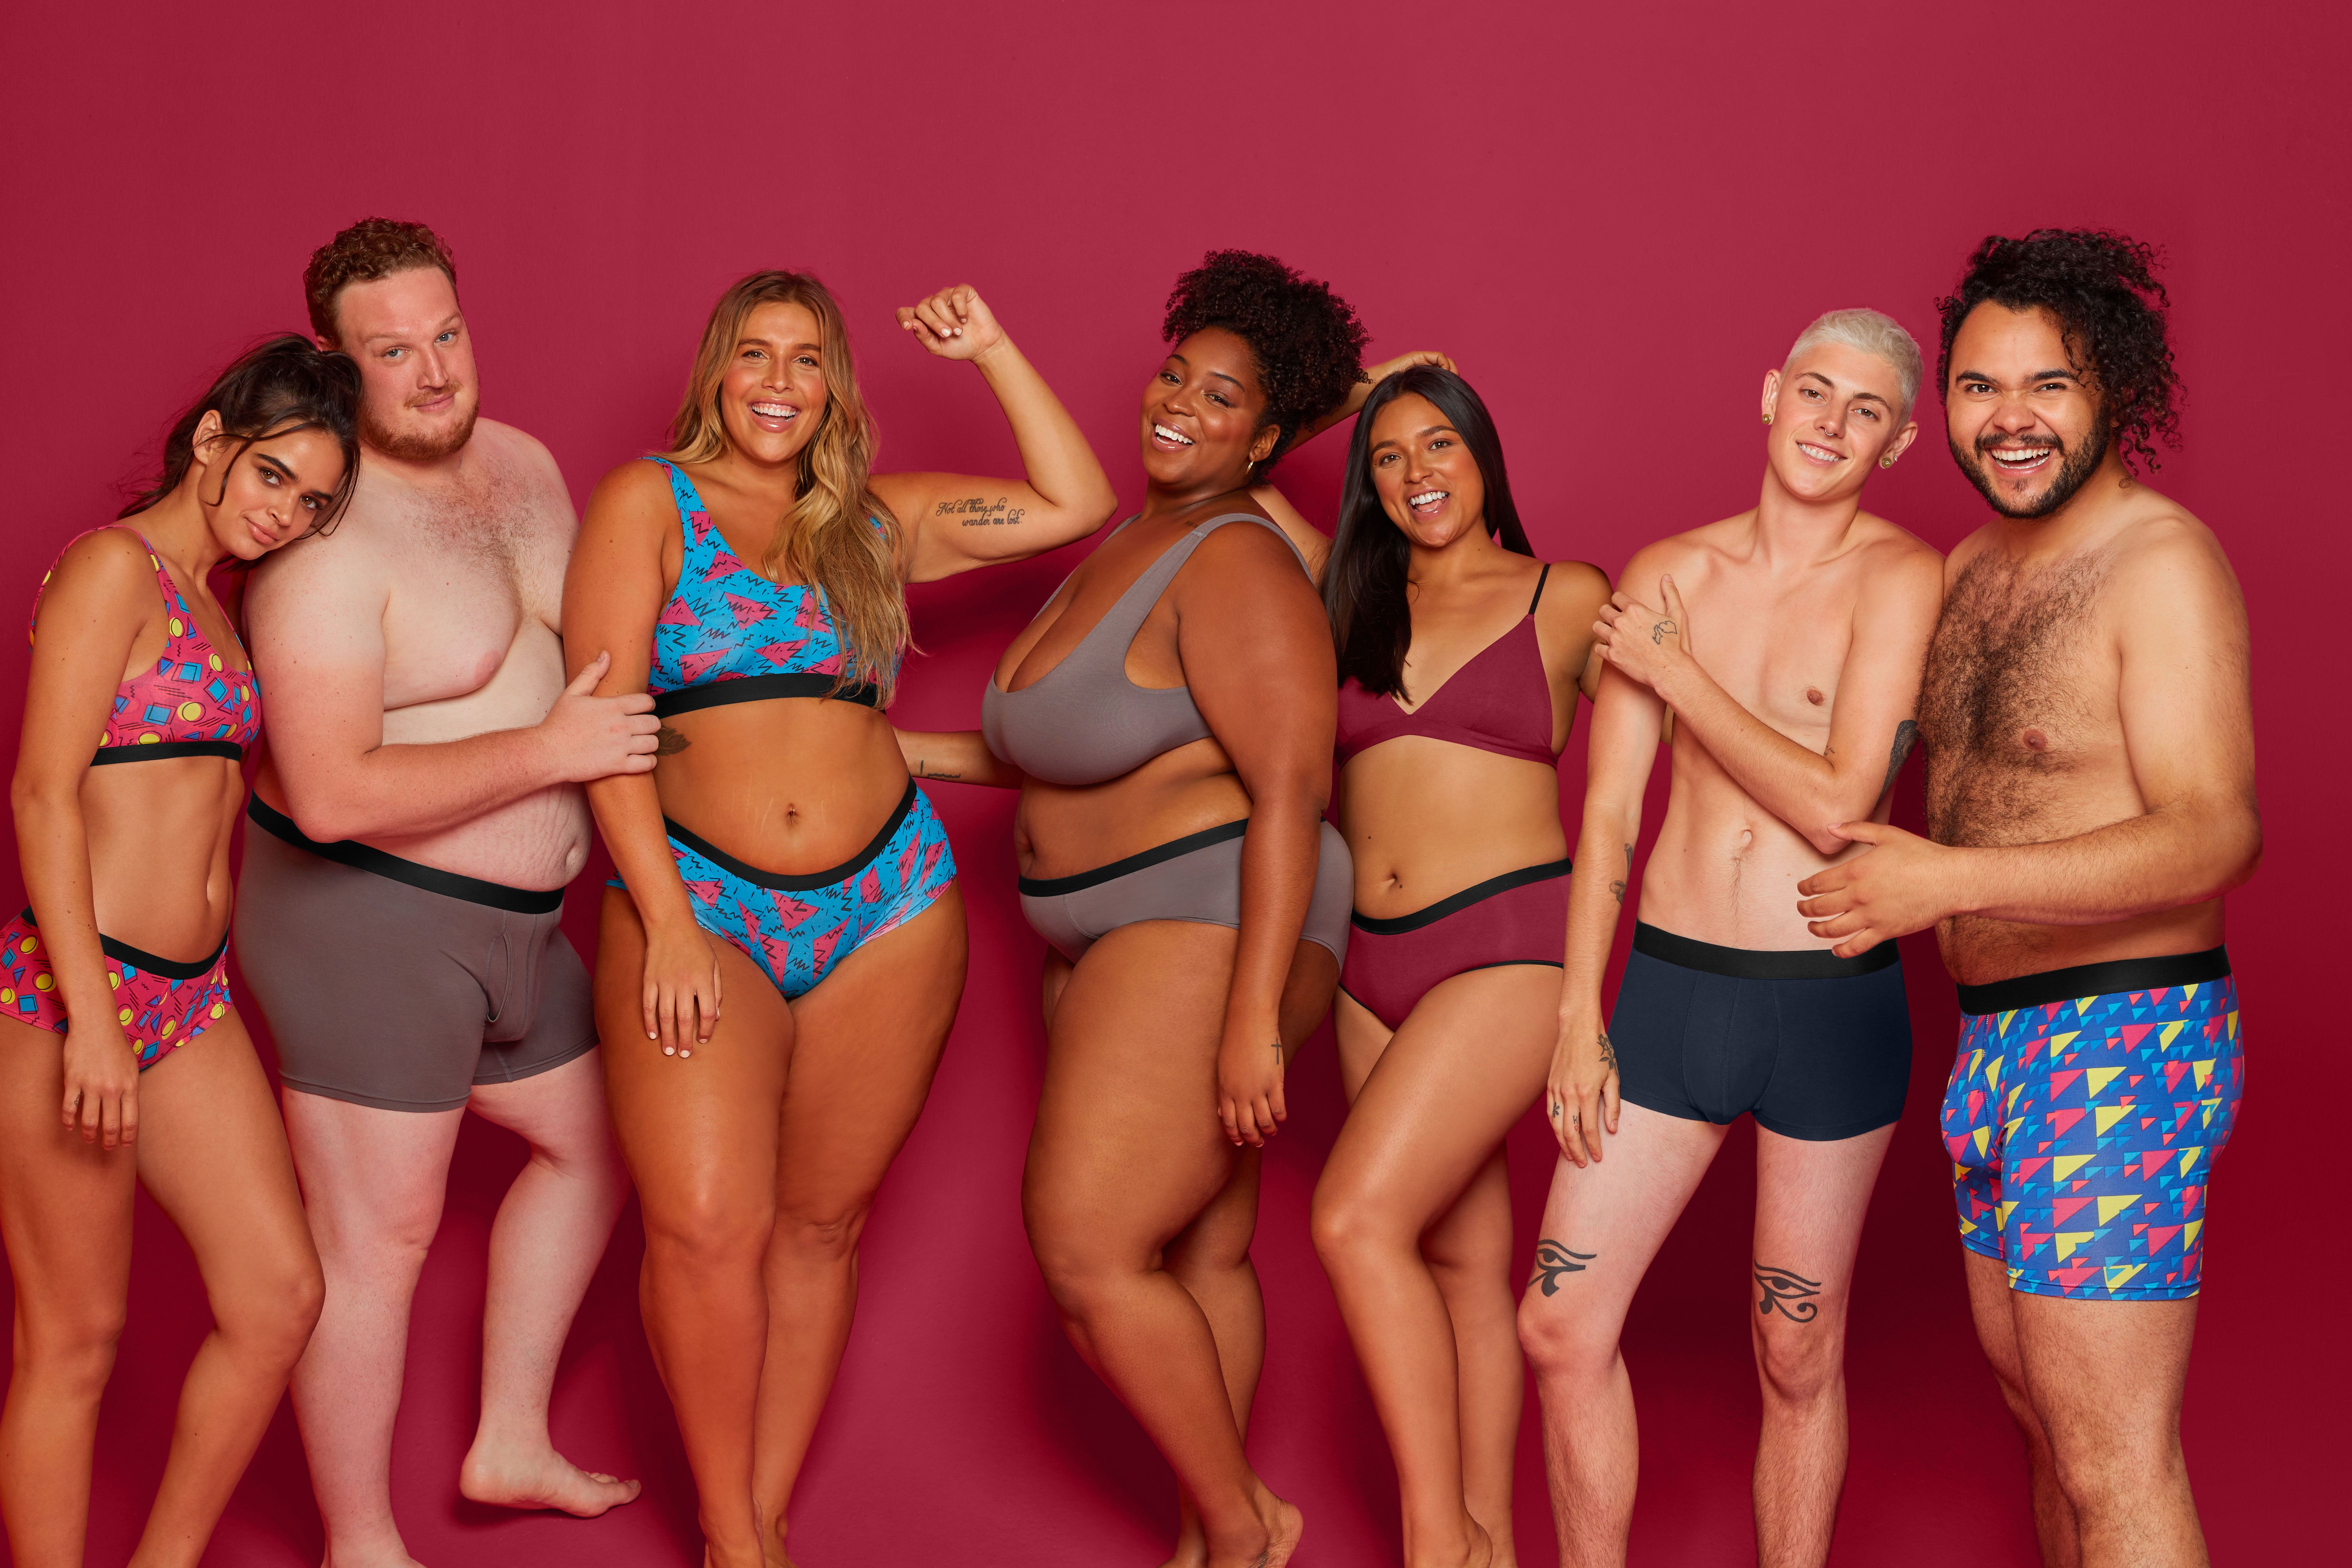 MeUndies New Inclusive Sizing From XS to 4XL - New Men's Briefs